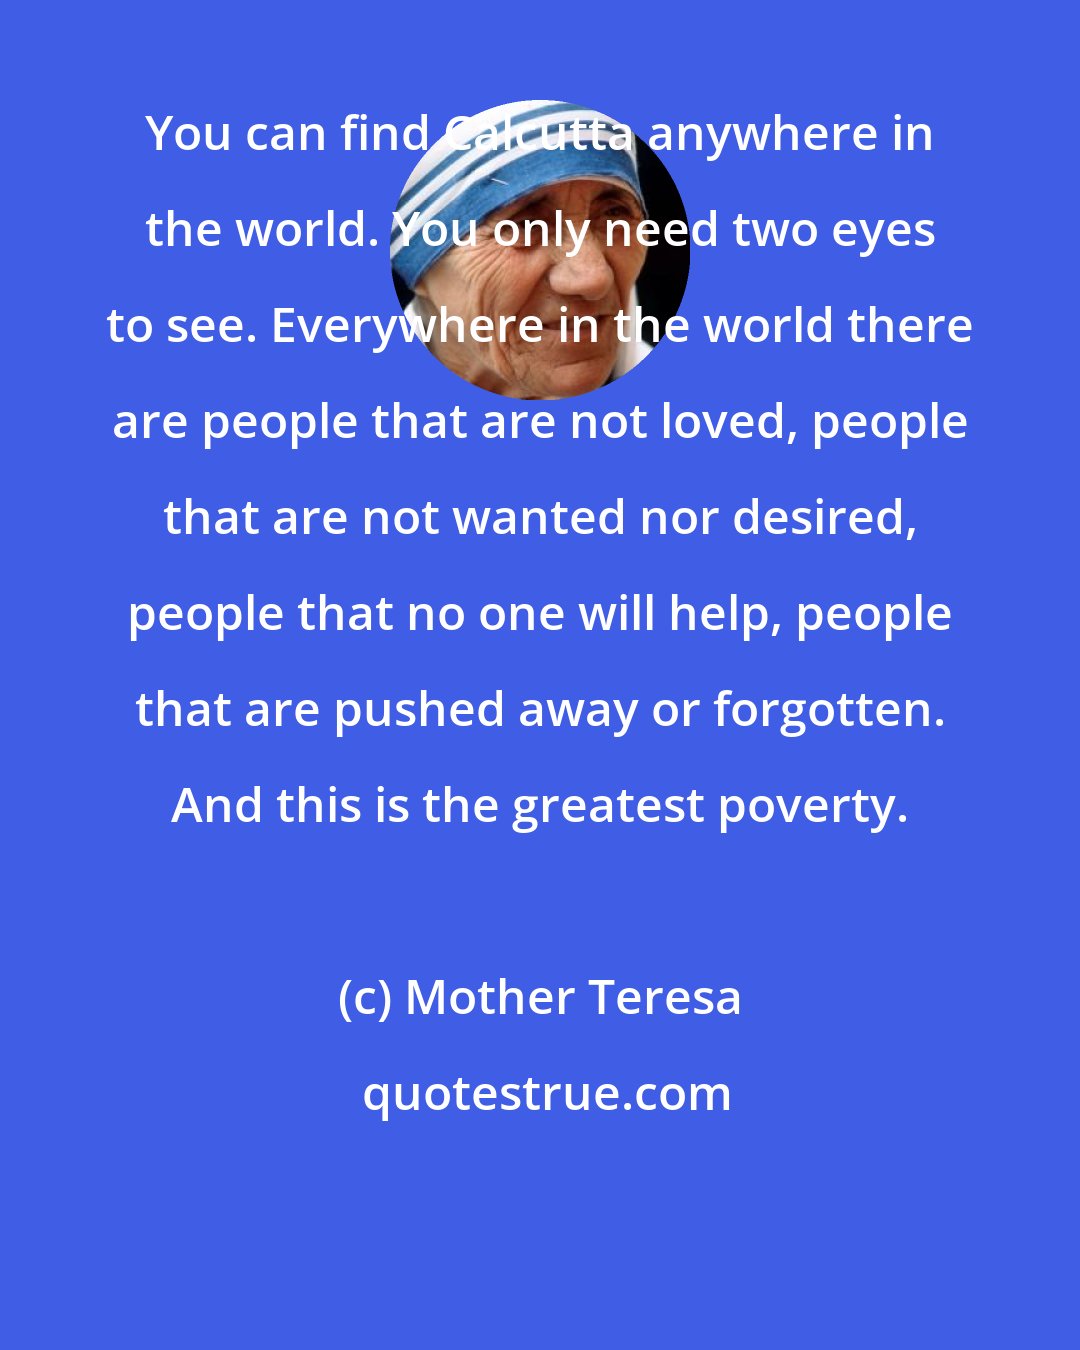 Mother Teresa: You can find Calcutta anywhere in the world. You only need two eyes to see. Everywhere in the world there are people that are not loved, people that are not wanted nor desired, people that no one will help, people that are pushed away or forgotten. And this is the greatest poverty.